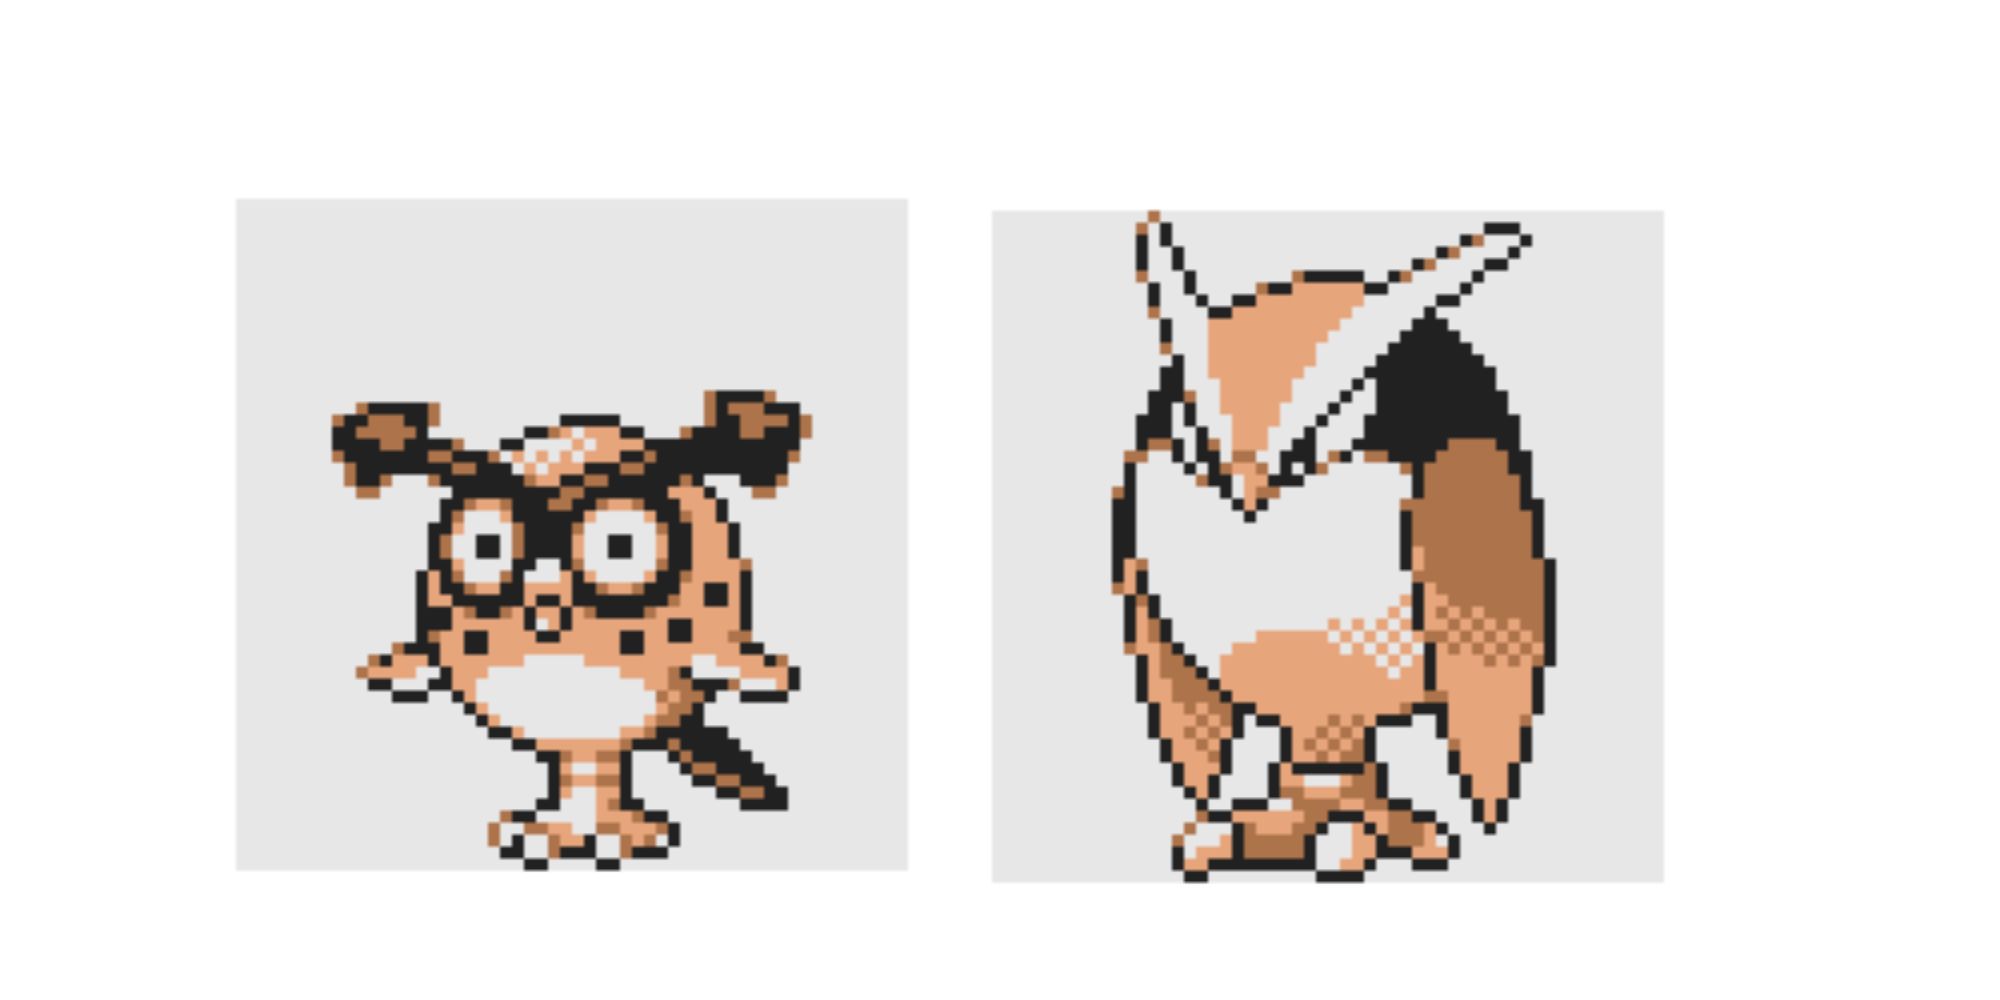 Demo versions of Hoothoot and Noctowl in Pokemon G&S